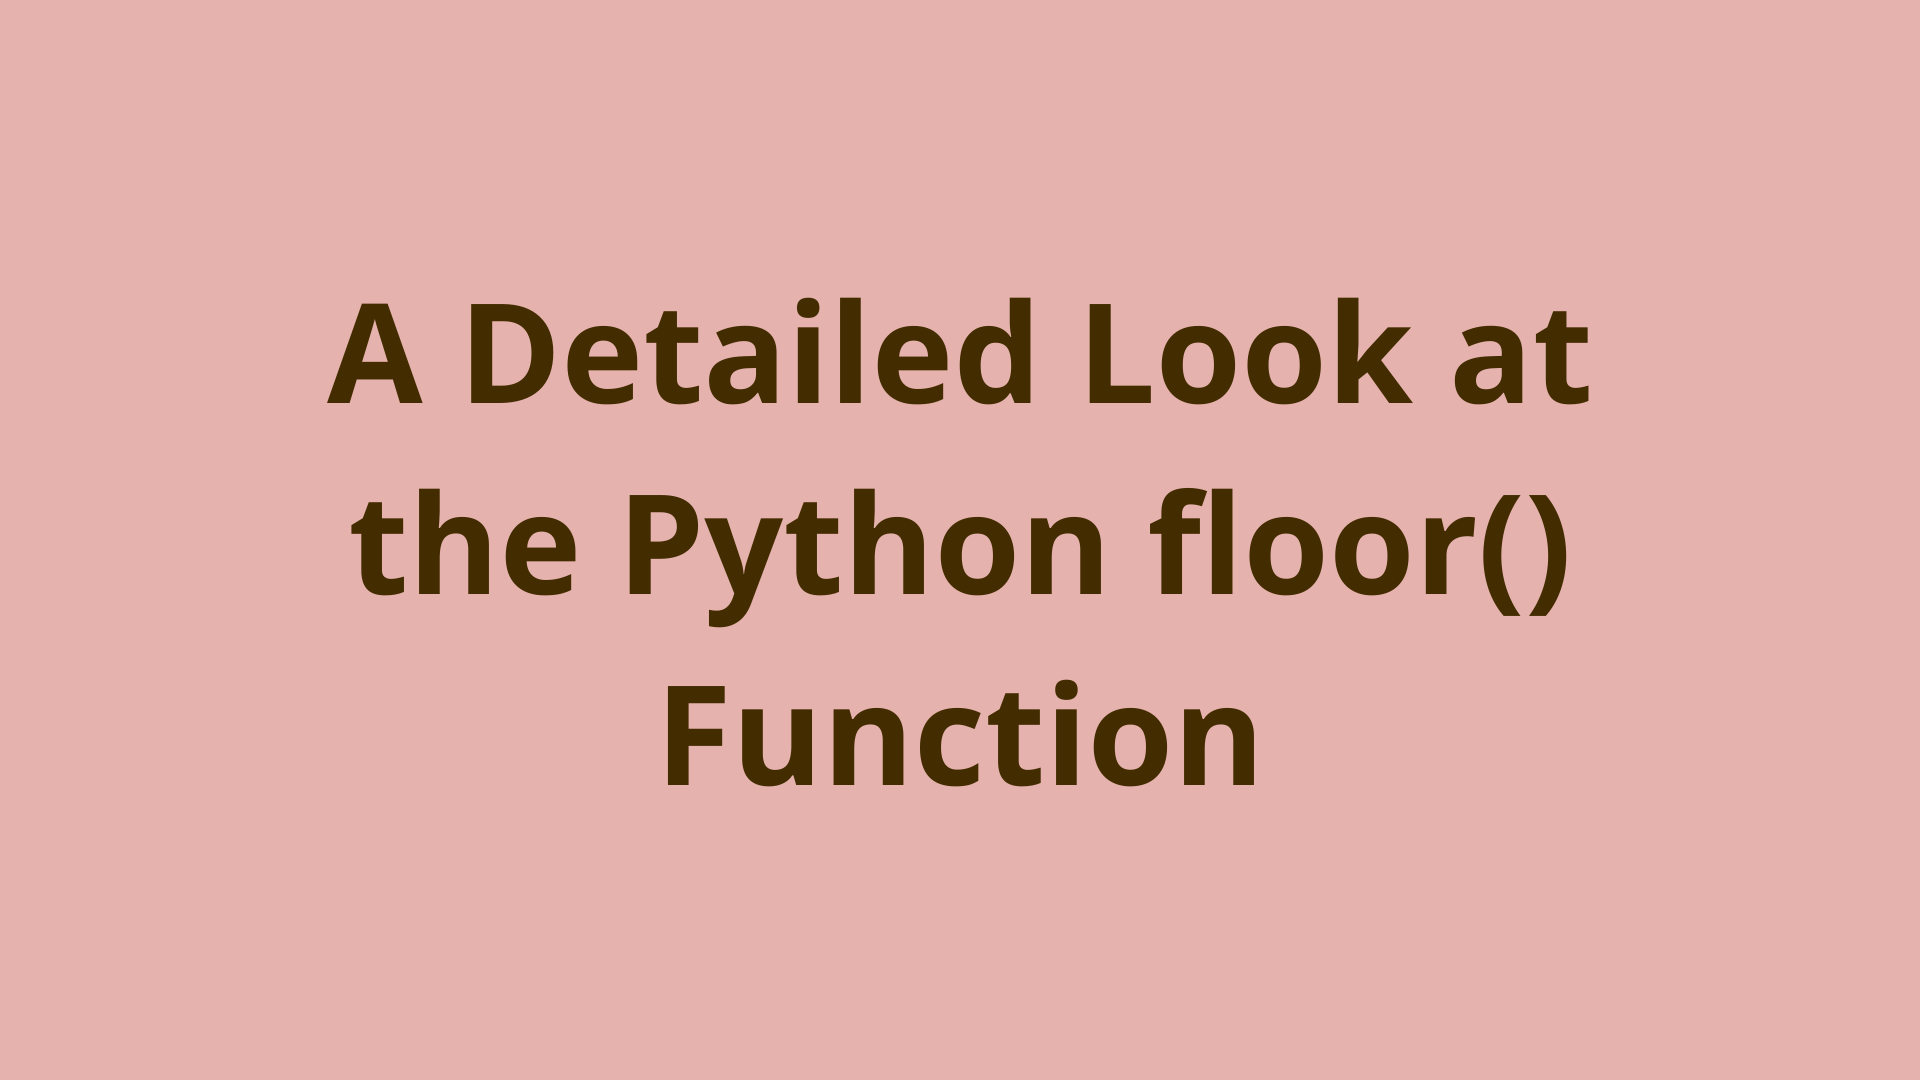 Image of A Detailed Look at the Python floor() Function